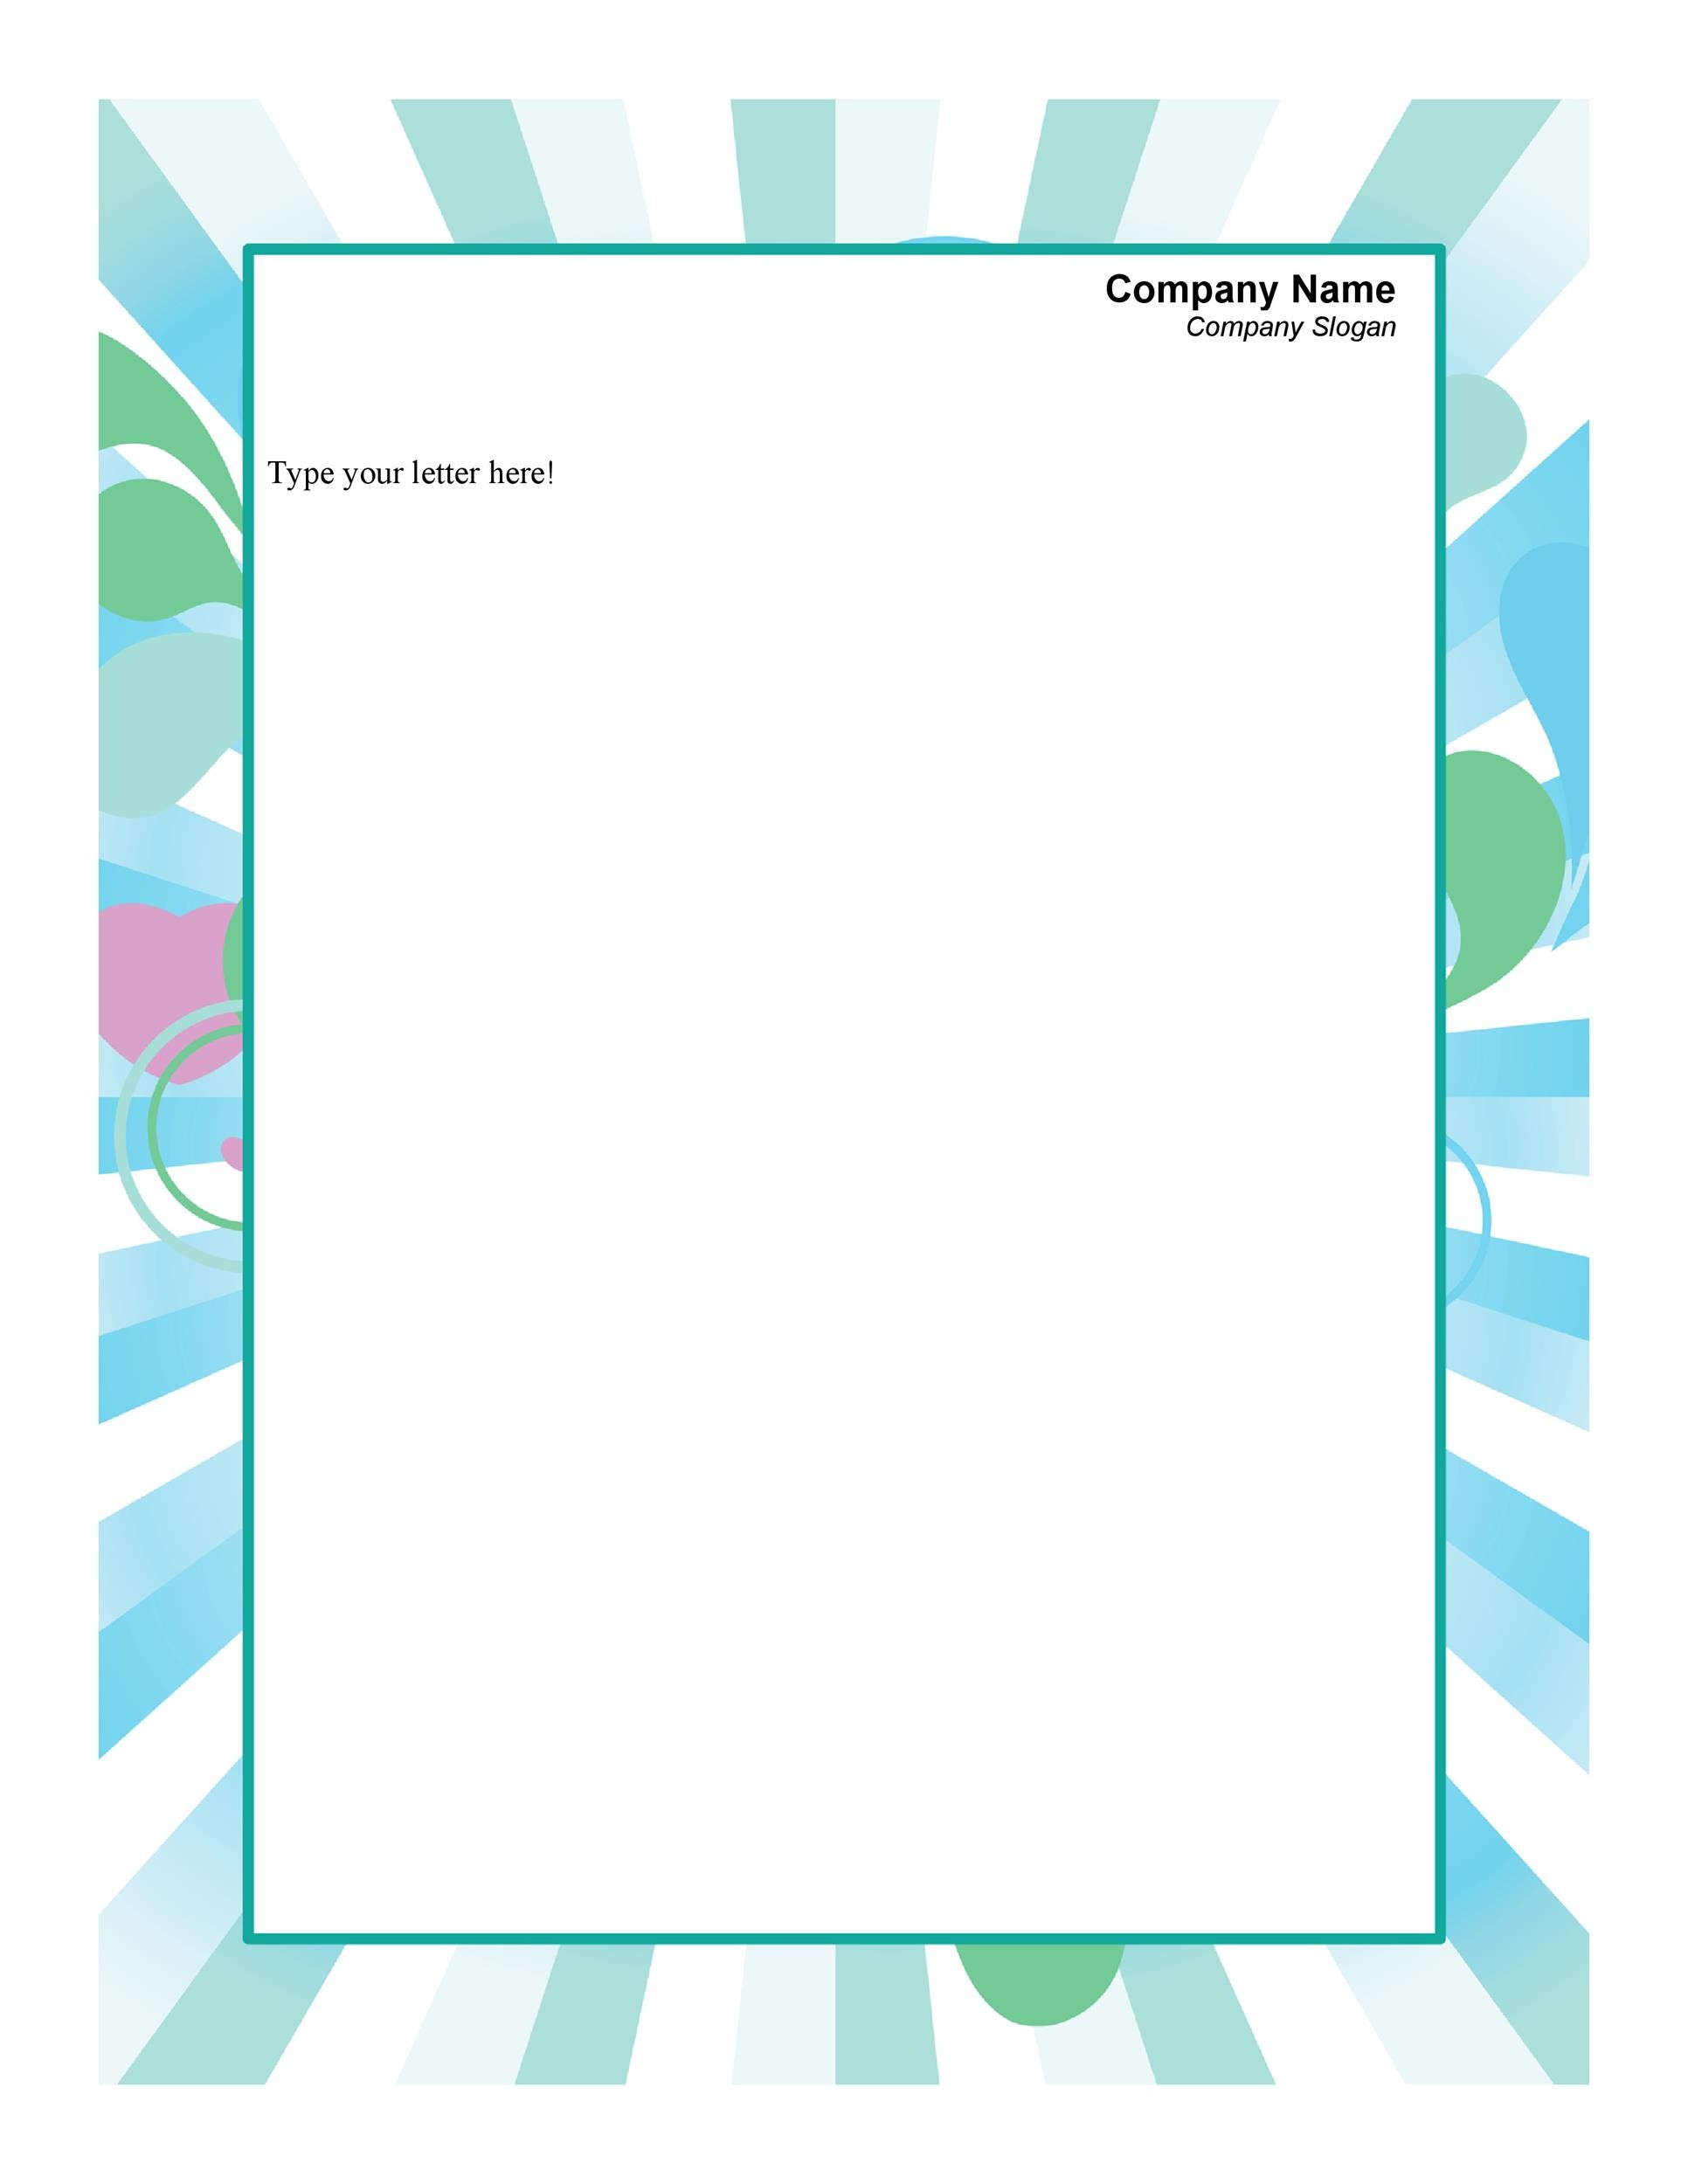 Personal Letterhead Template Free Download